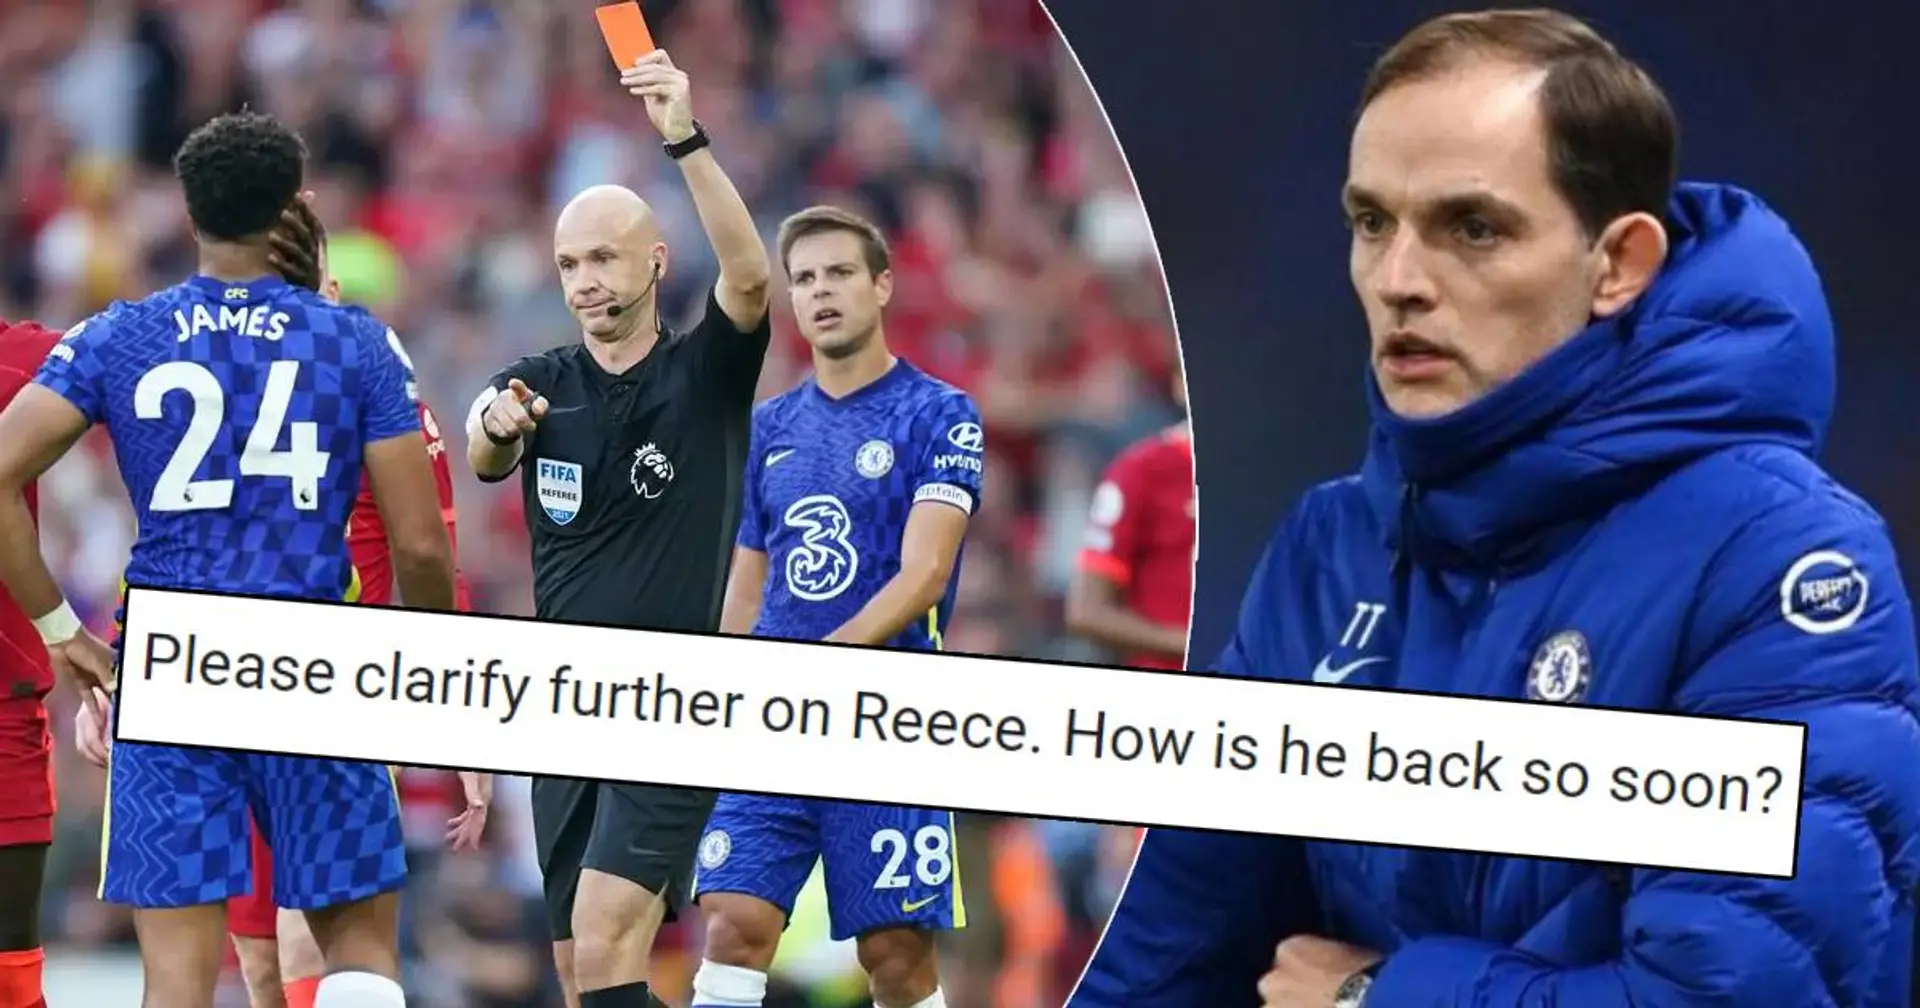 Why is Reece available for Spurs game despite getting red card 1 game ago? You asked, we answered 